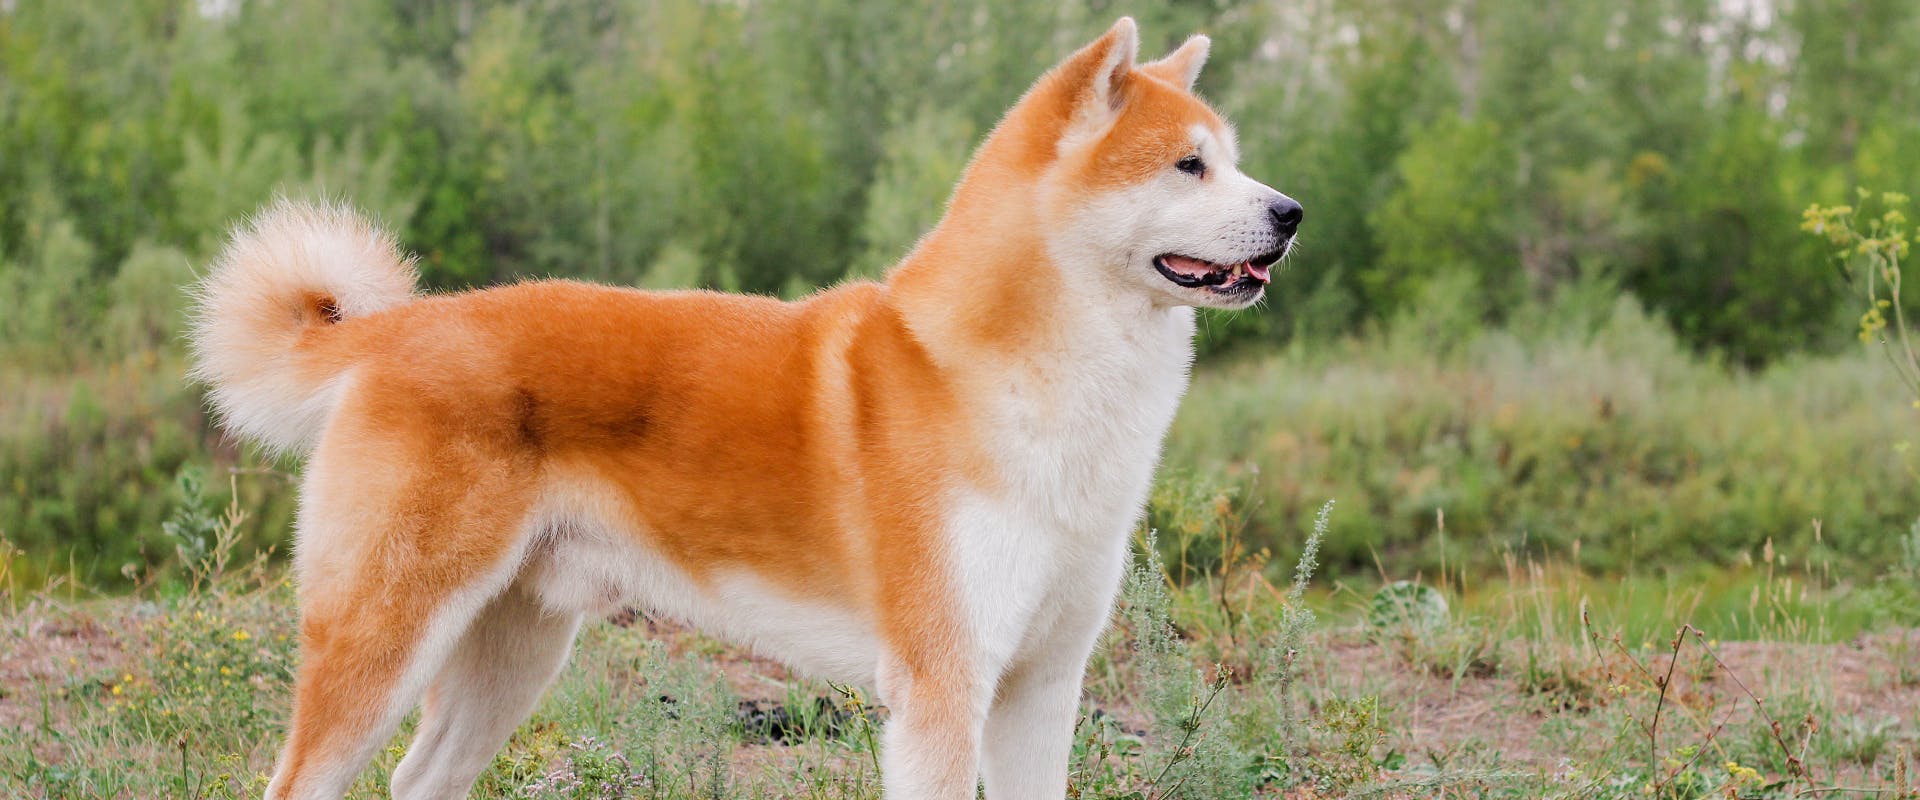 a Japanese Akita standing to attention in a grassy woodland area